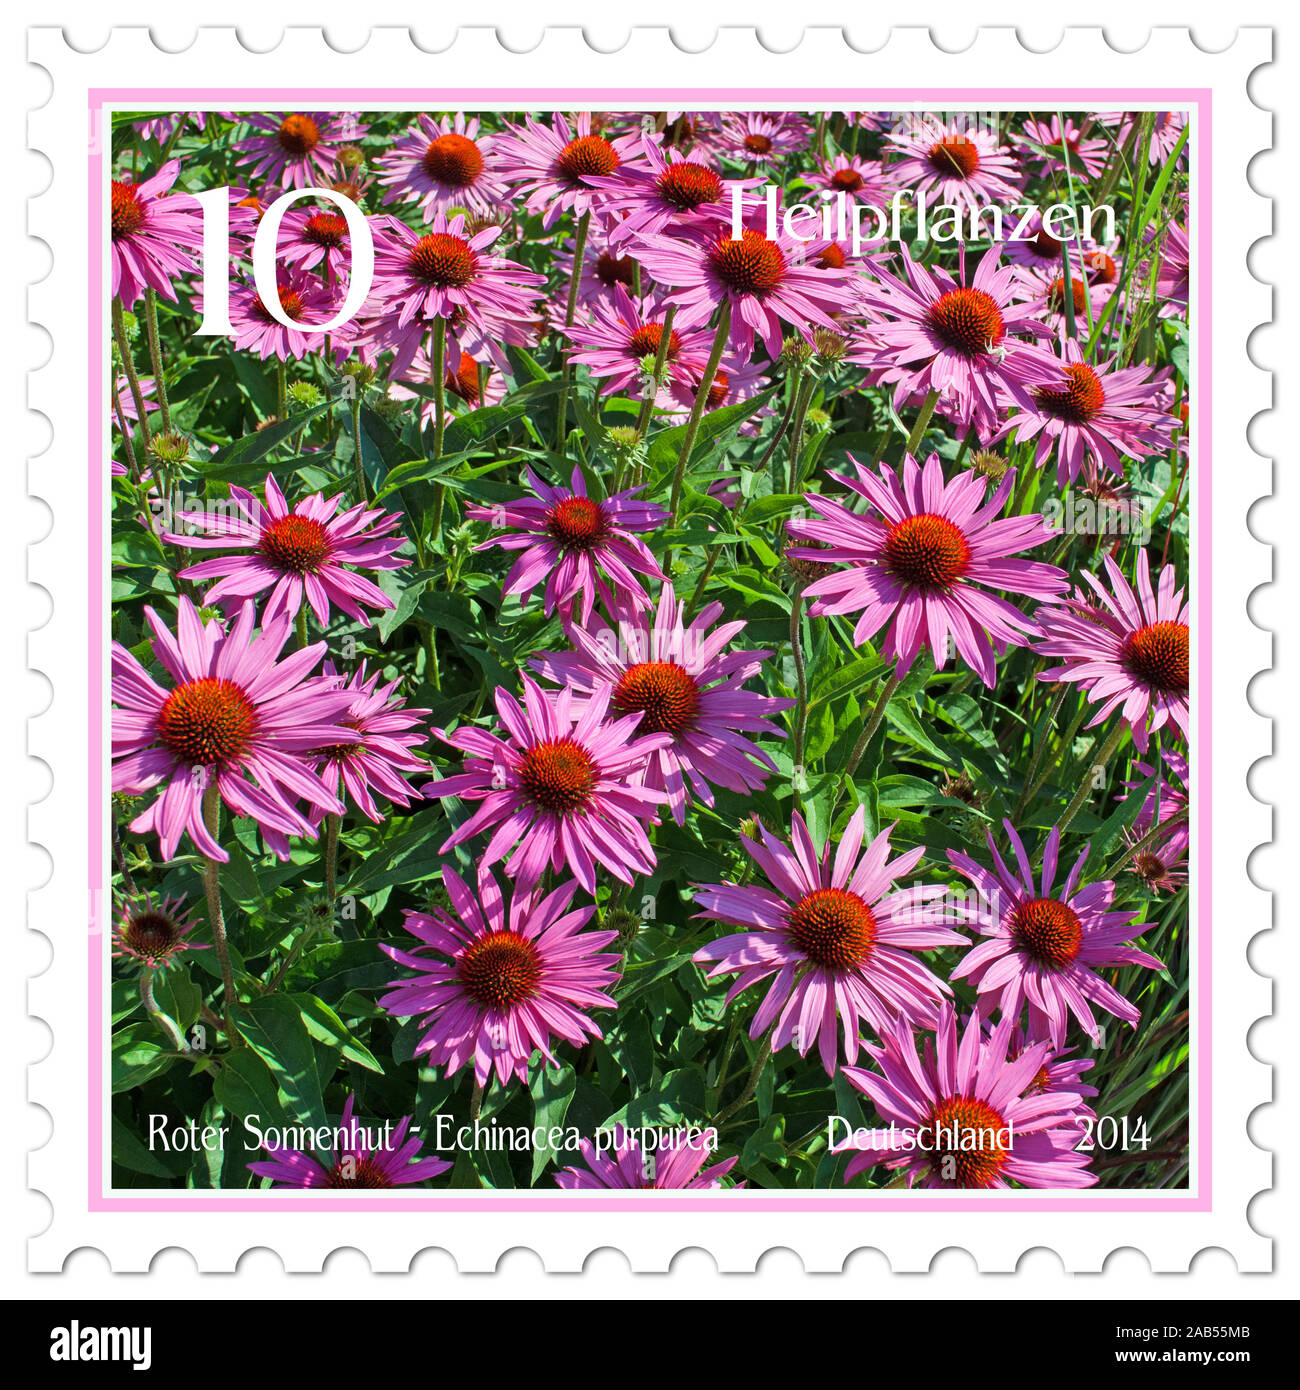 Postage stamp with the image of the red sunhat, Echinacea purpurea Stock Photo